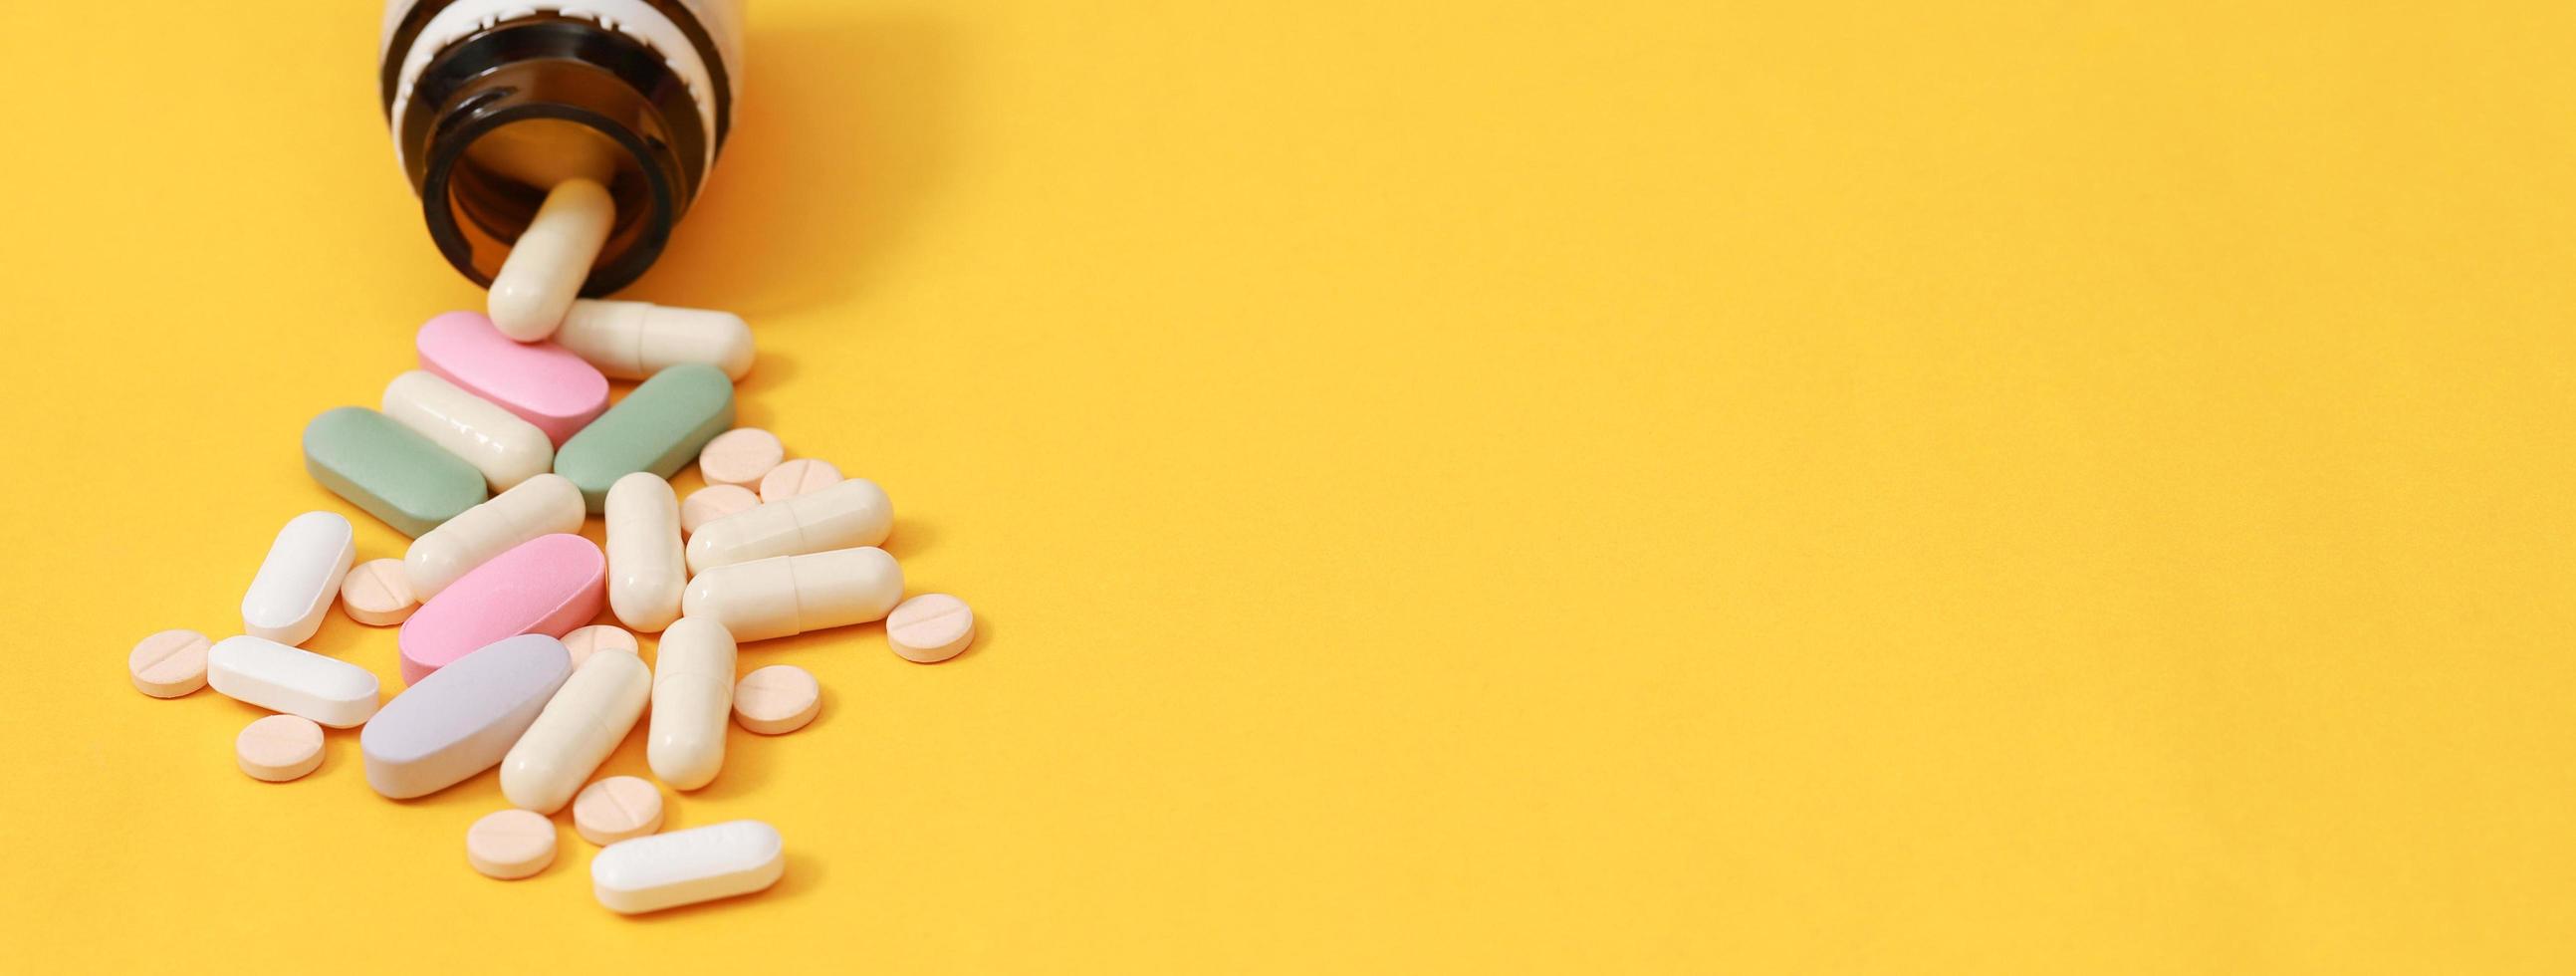 Pill bottle spilling out. colorful pills on to surface tablets on yellow background. top view. drug medical healthcare concept photo